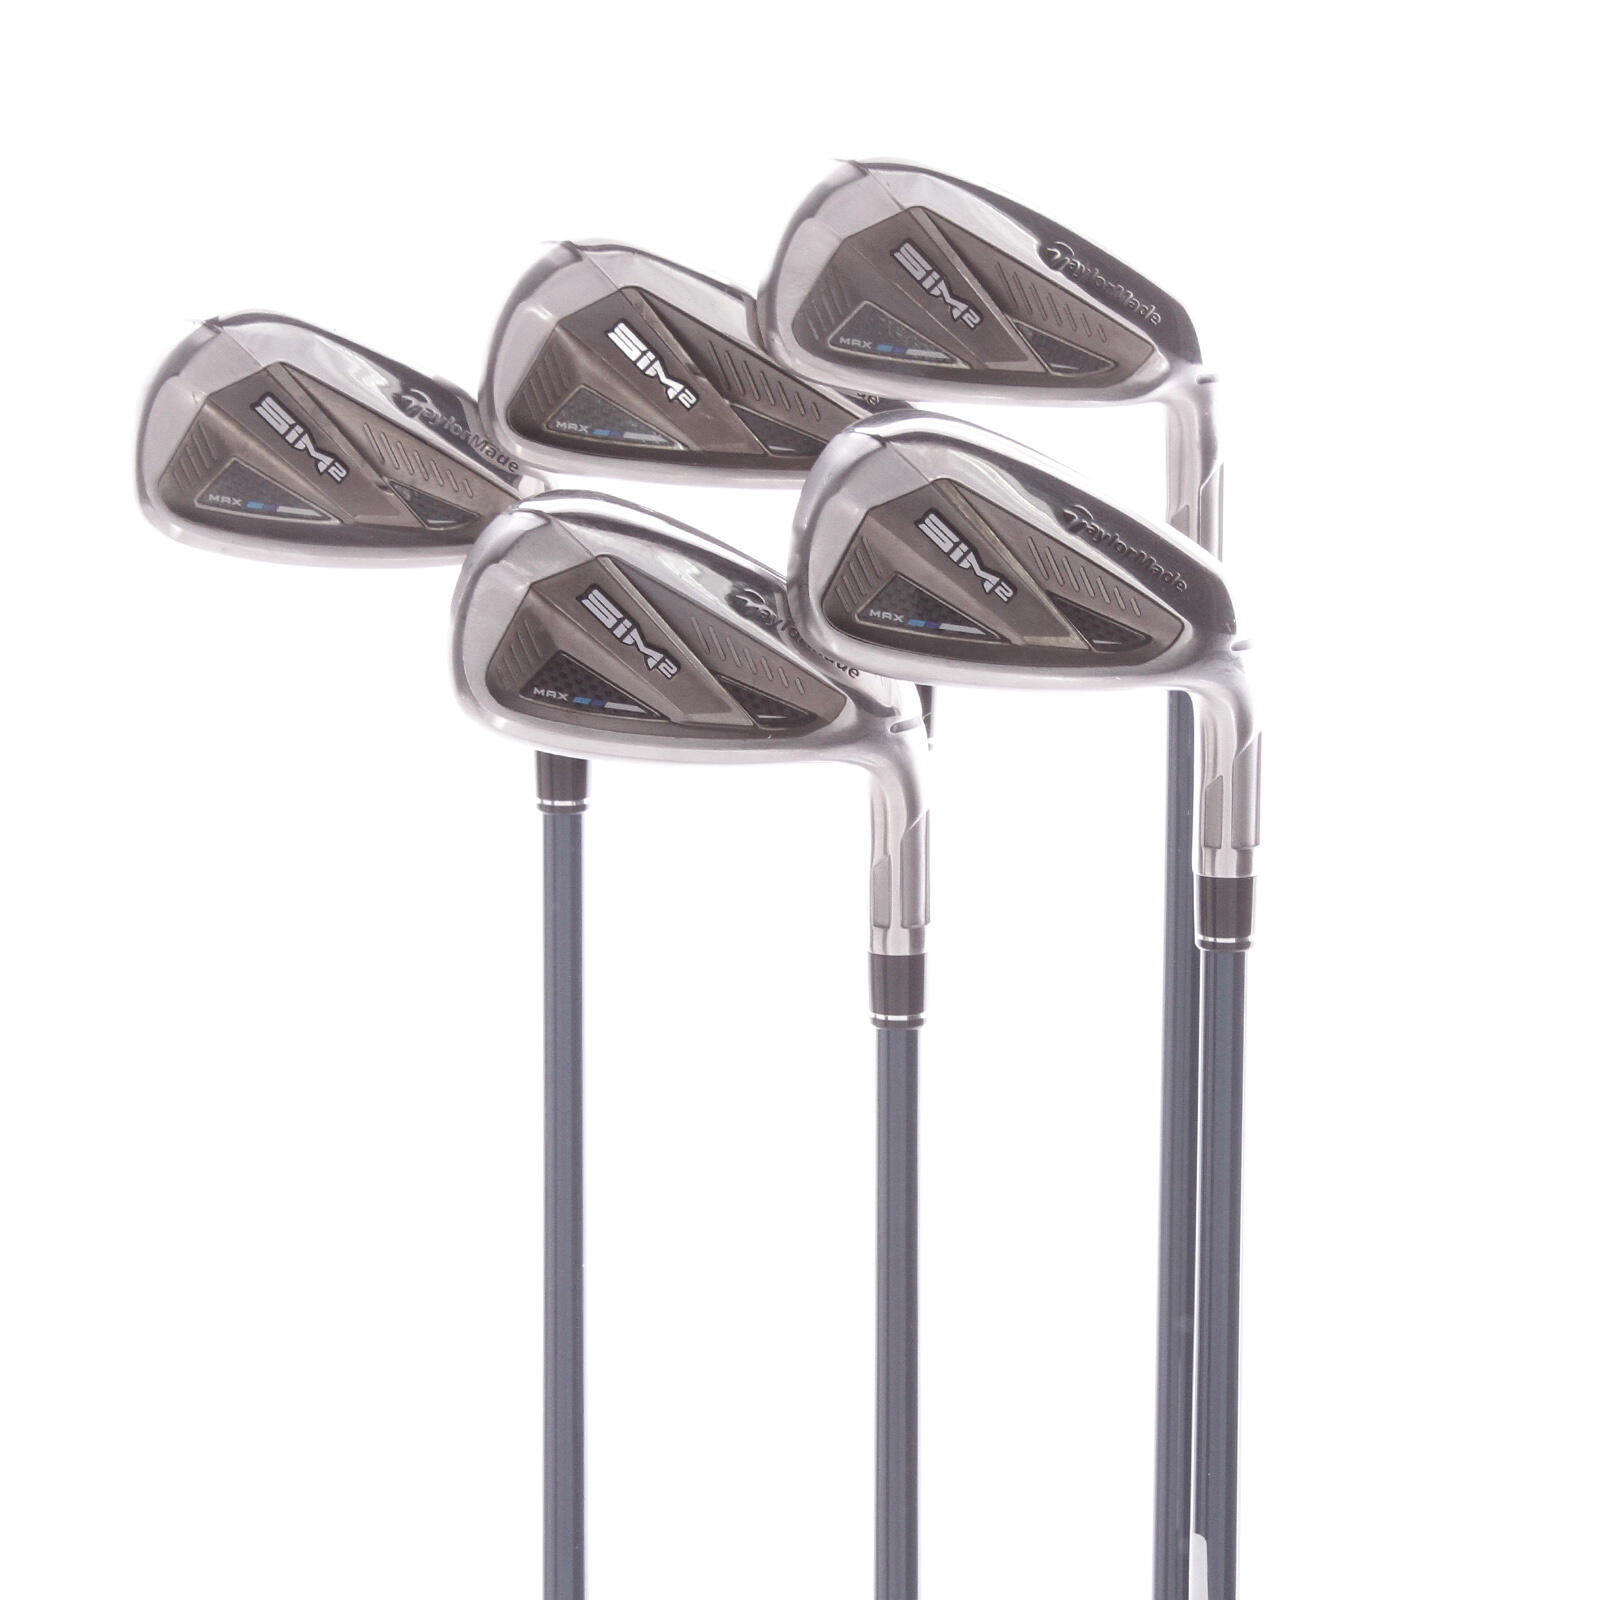 USED - Iron Set 6-PW TaylorMade Sim2 Max Graphite Shaft Right Handed - GRADE B 1/7